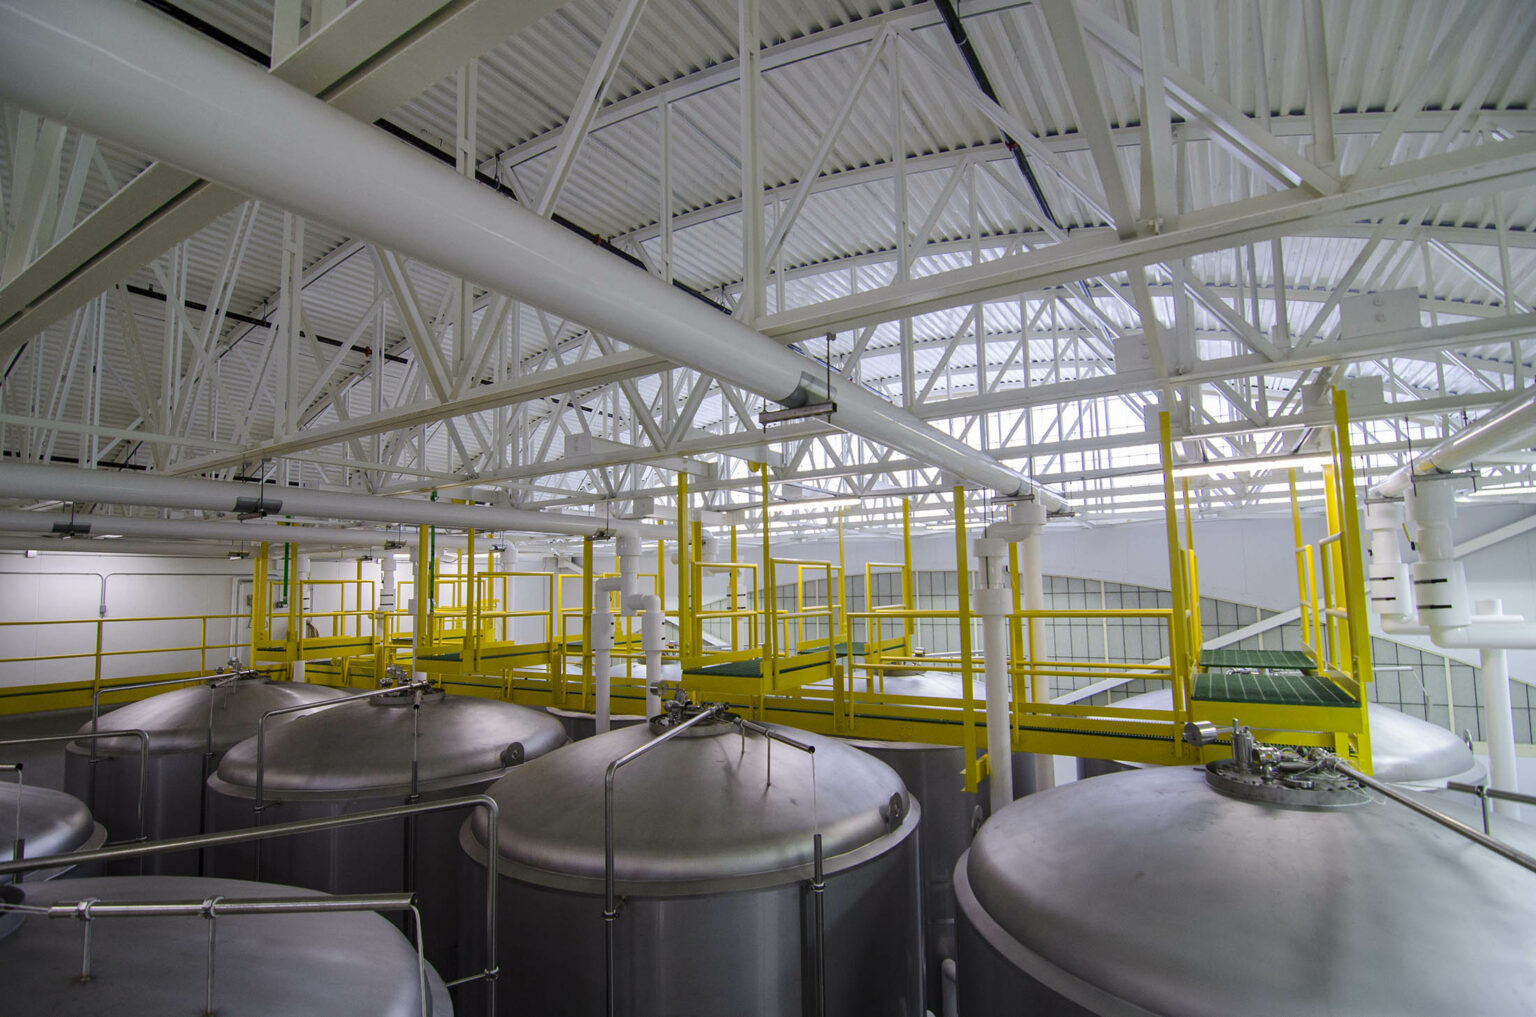 Interior view of a brewery's stills with a yellow walking plank